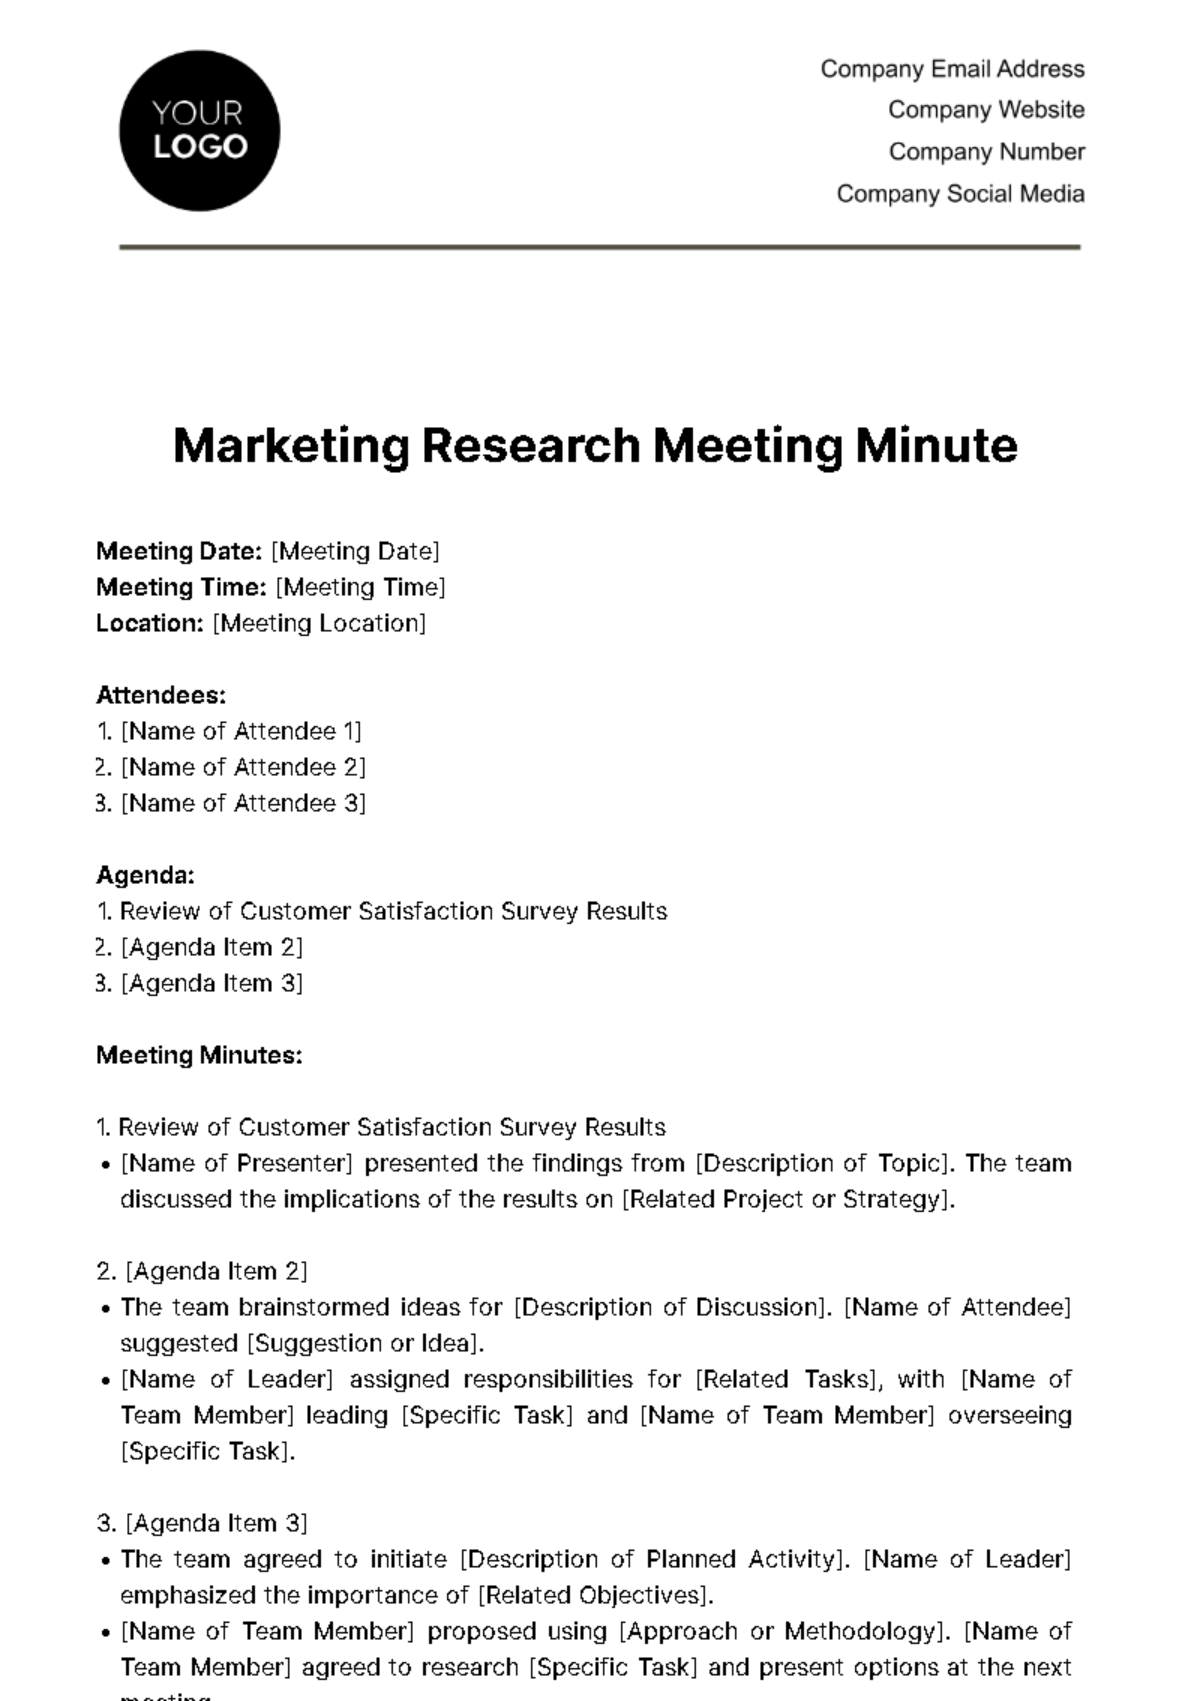 Marketing Research Meeting Minute Template